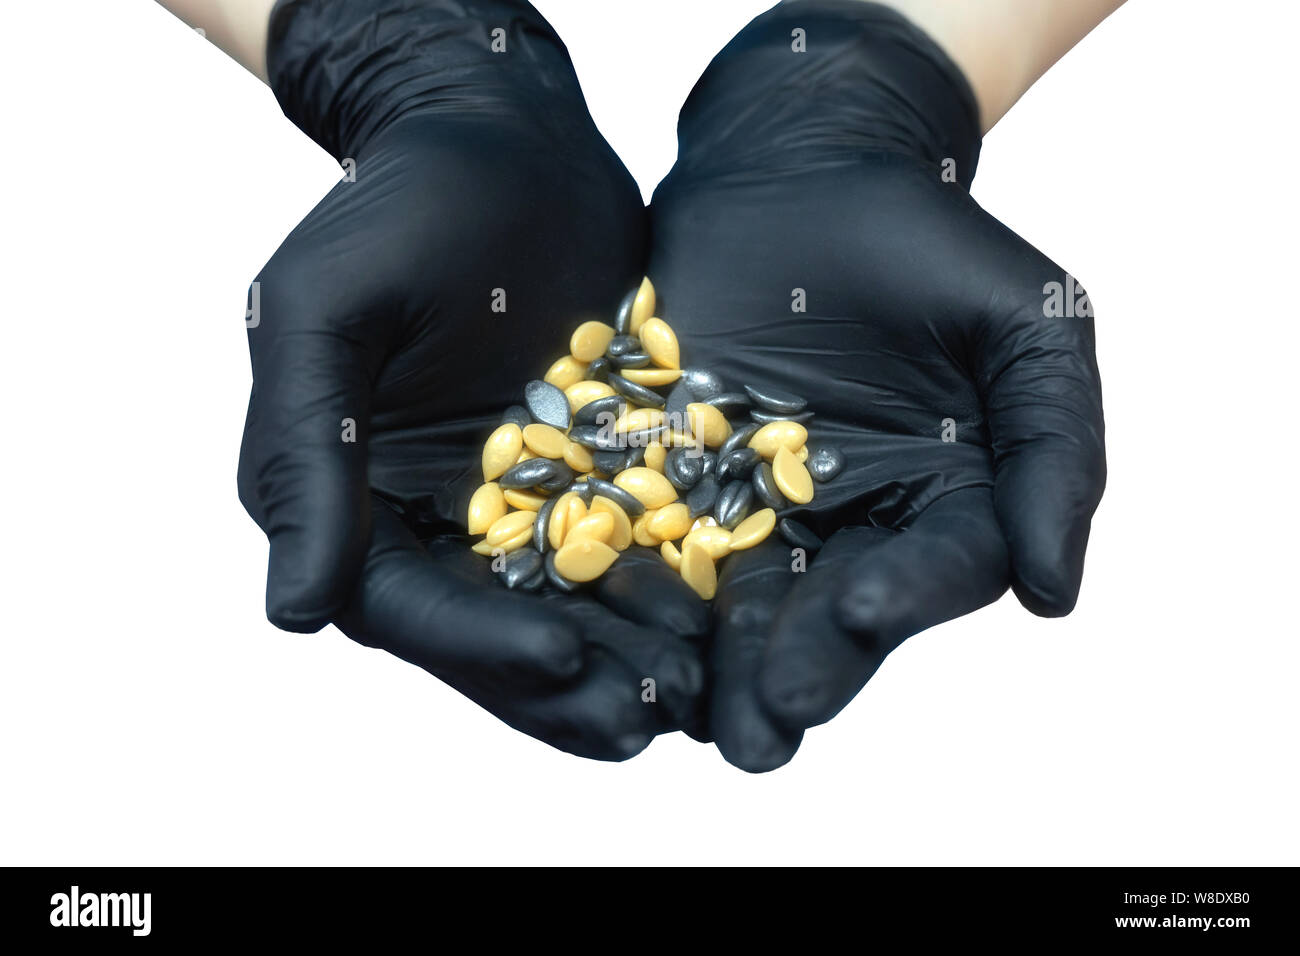 Girl cosmetician in black medical gloves with granules of wax for depilation in the shape of a heart on the palm Stock Photo